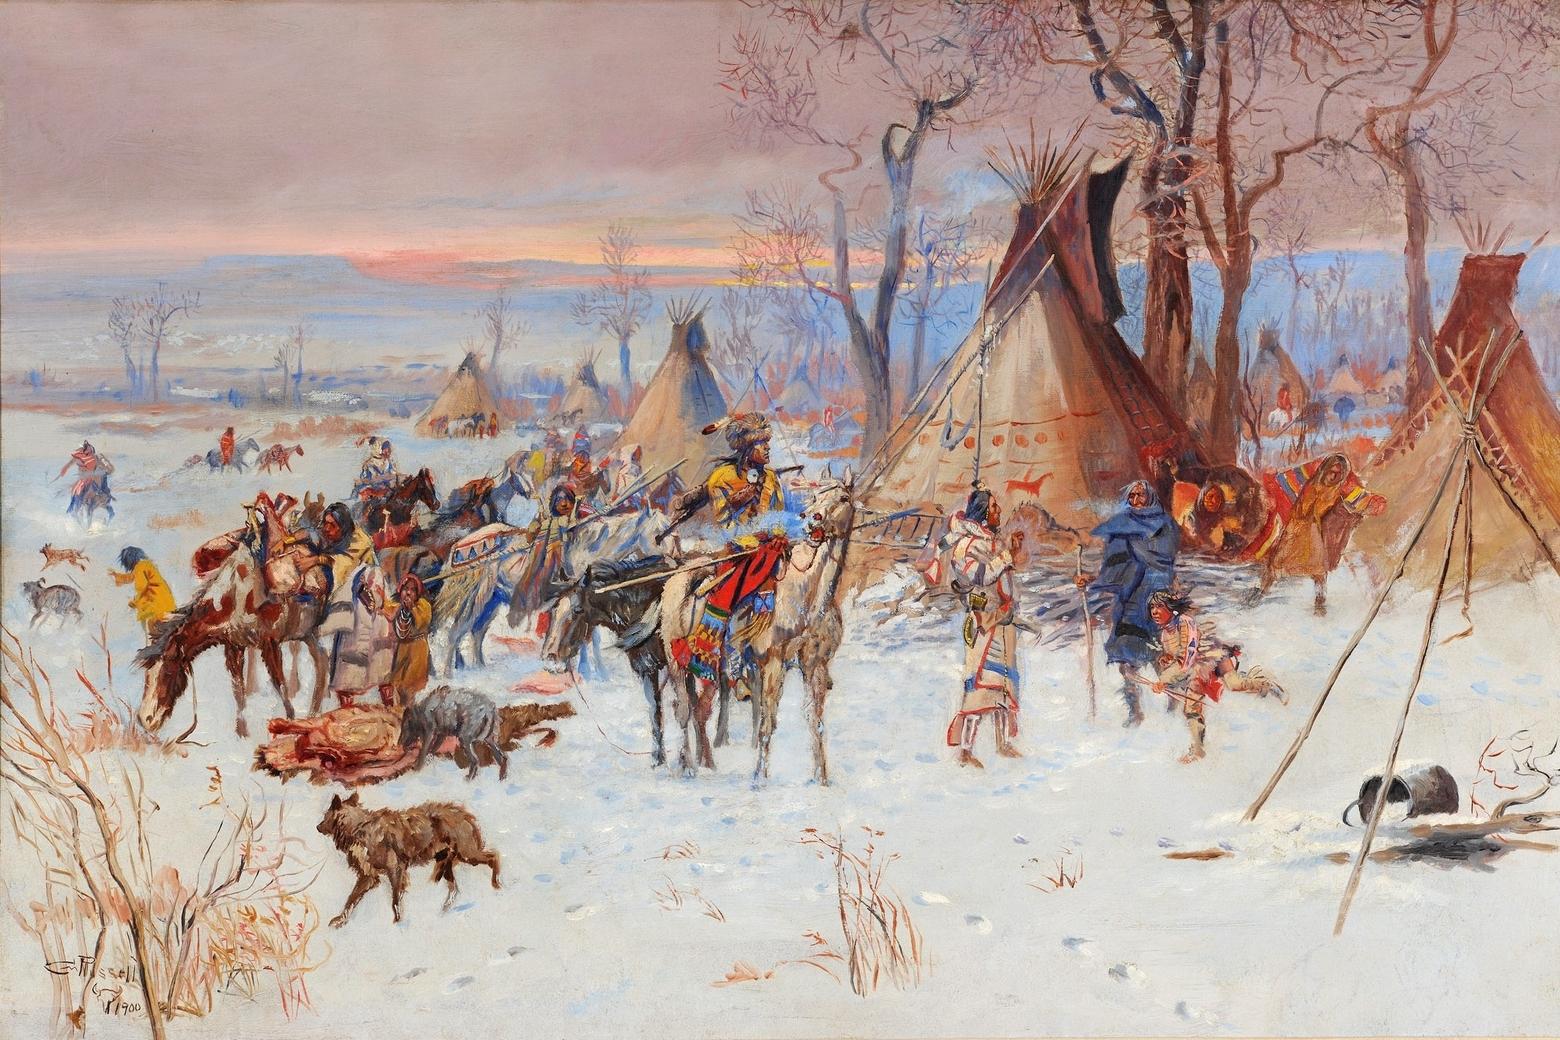 Charlie Russell's painting "Indian Hunters Return." "My grandfather owned a house in Lodge Grass, Montana," Morin says. "As far back as I can remember, there was a Charlie Russell painting hanging in the living room. It was 'Indian Hunters Return.'" Charles M. Russell, Oil, 1900, Montana Historical Society Mackay Collection, X1954.02.01